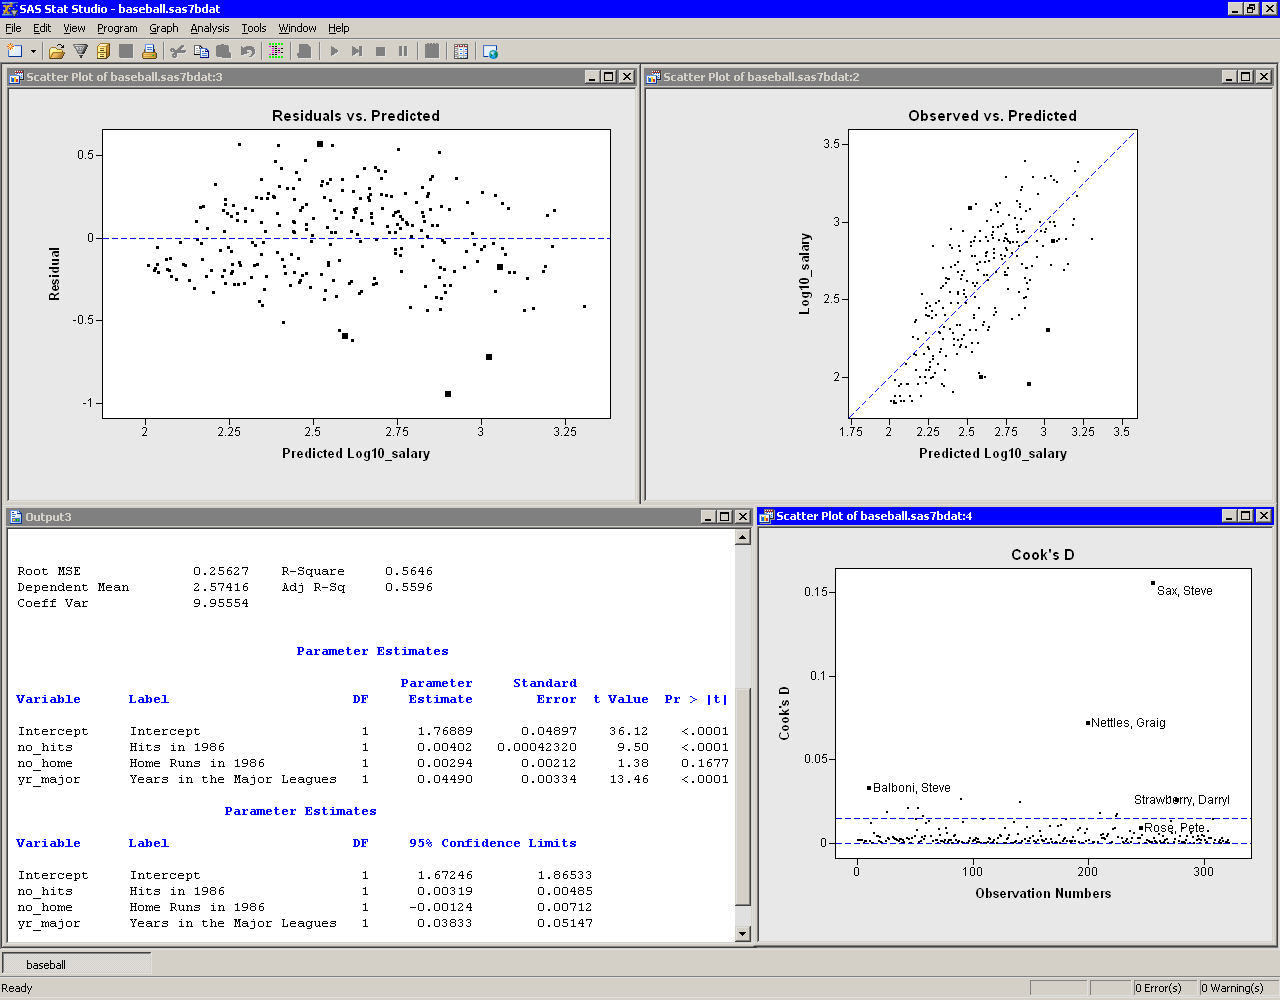 Results from the Linear Regression Analysis